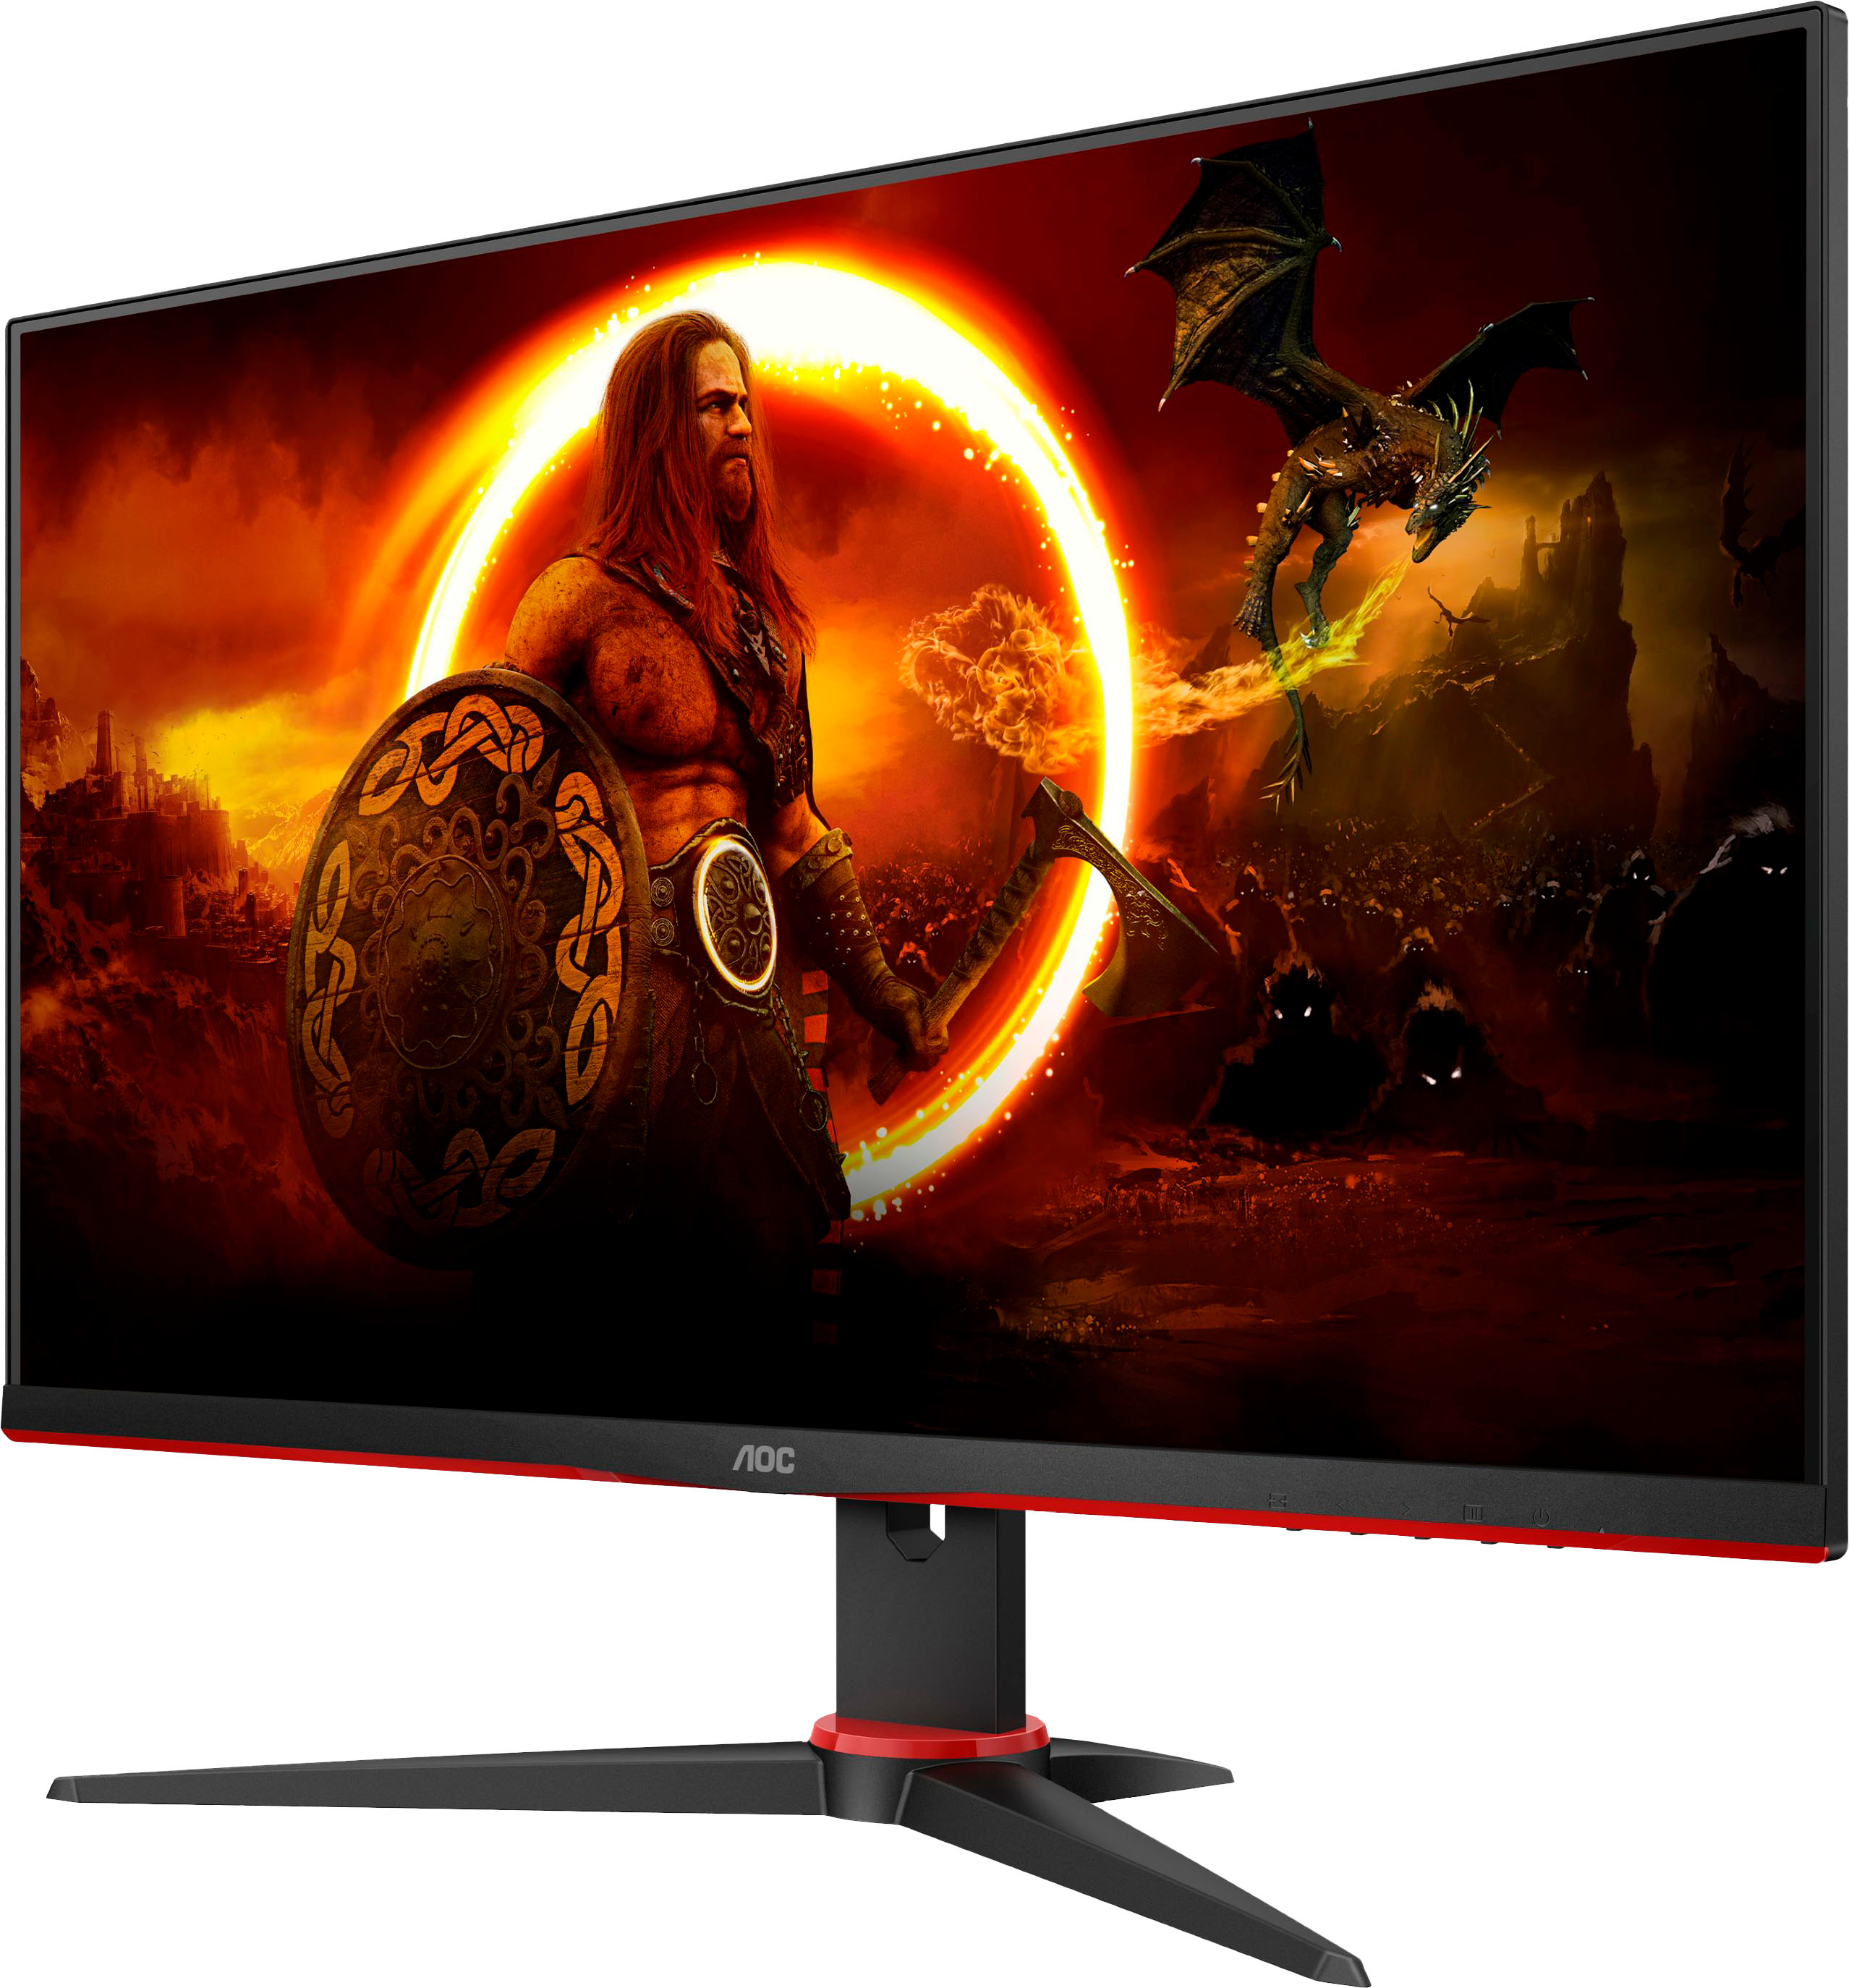 Best Monitor Deals: Save Big on AOC, Samsung, LG, Acer and Others - CNET